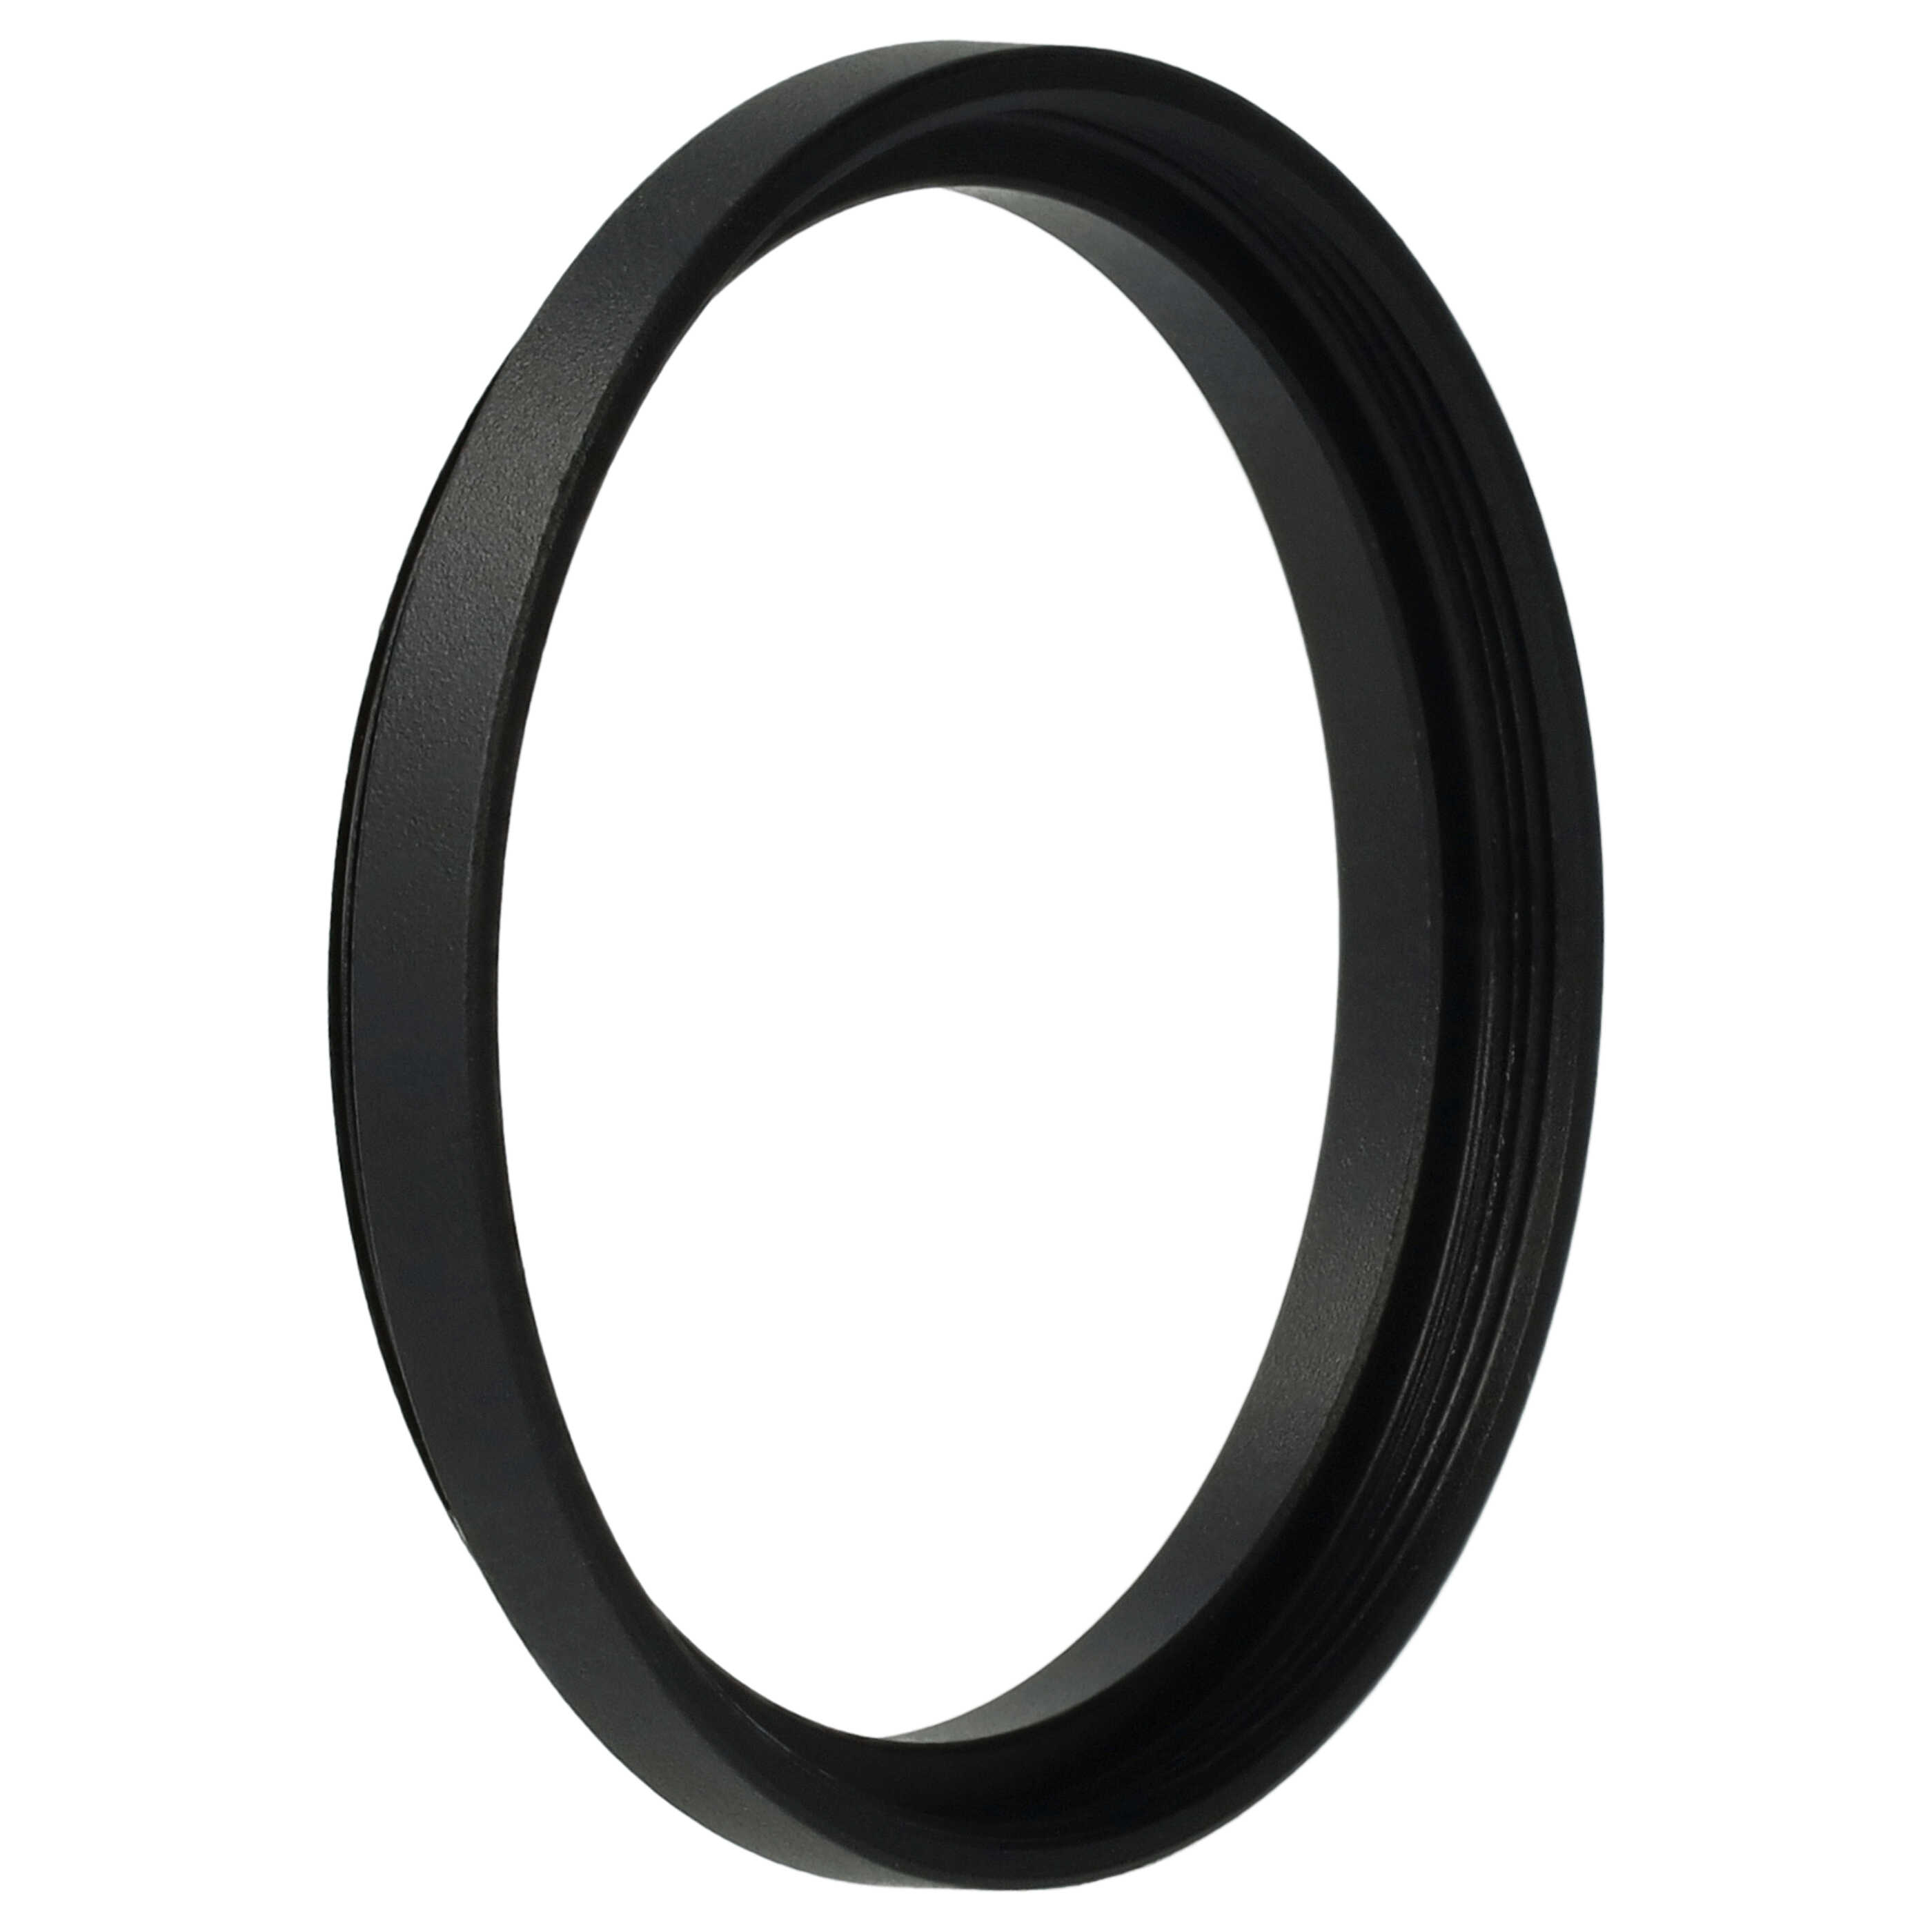 Step-Up Ring Adapter of 40.5 mm to 42 mmfor various Camera Lens - Filter Adapter